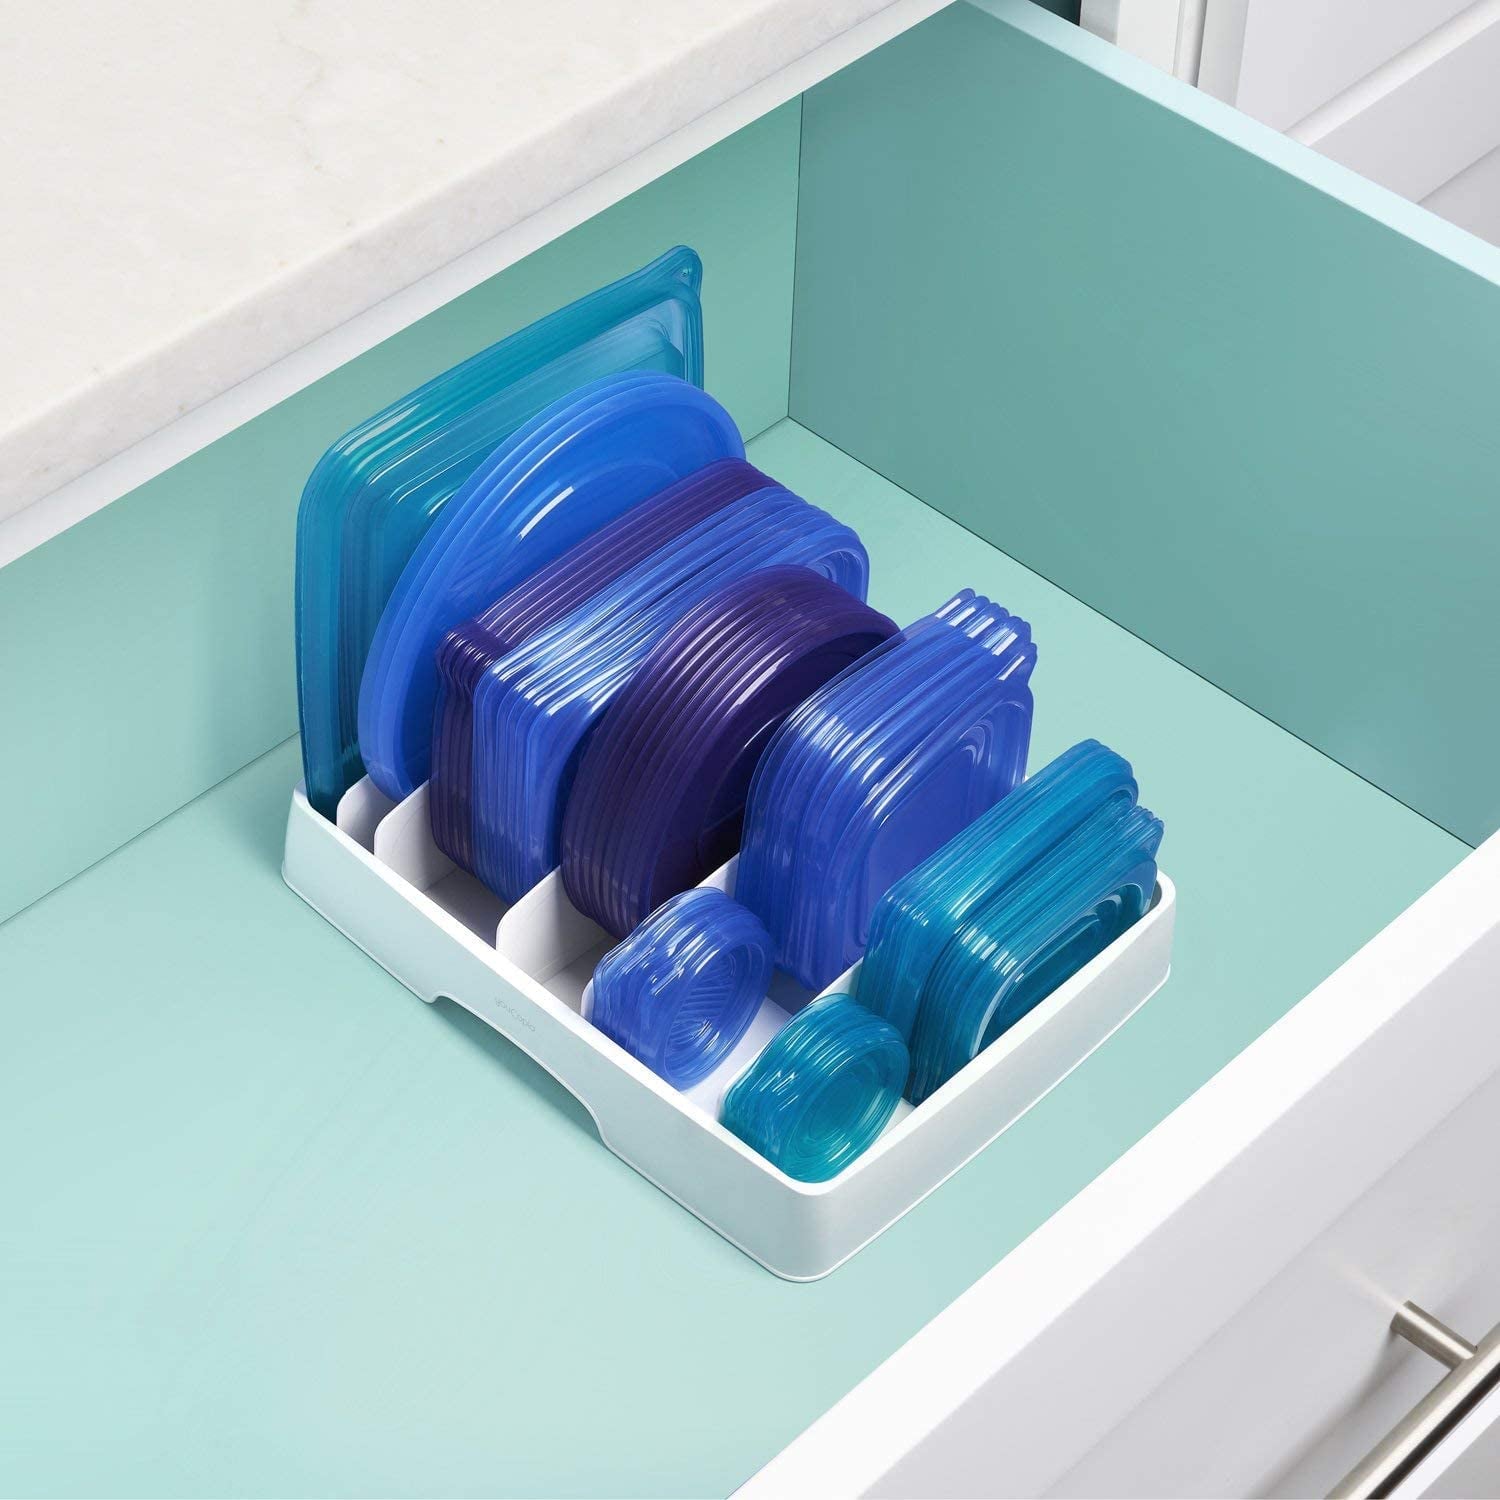 Home Organization Products: The Best Storage Containers, Drawer